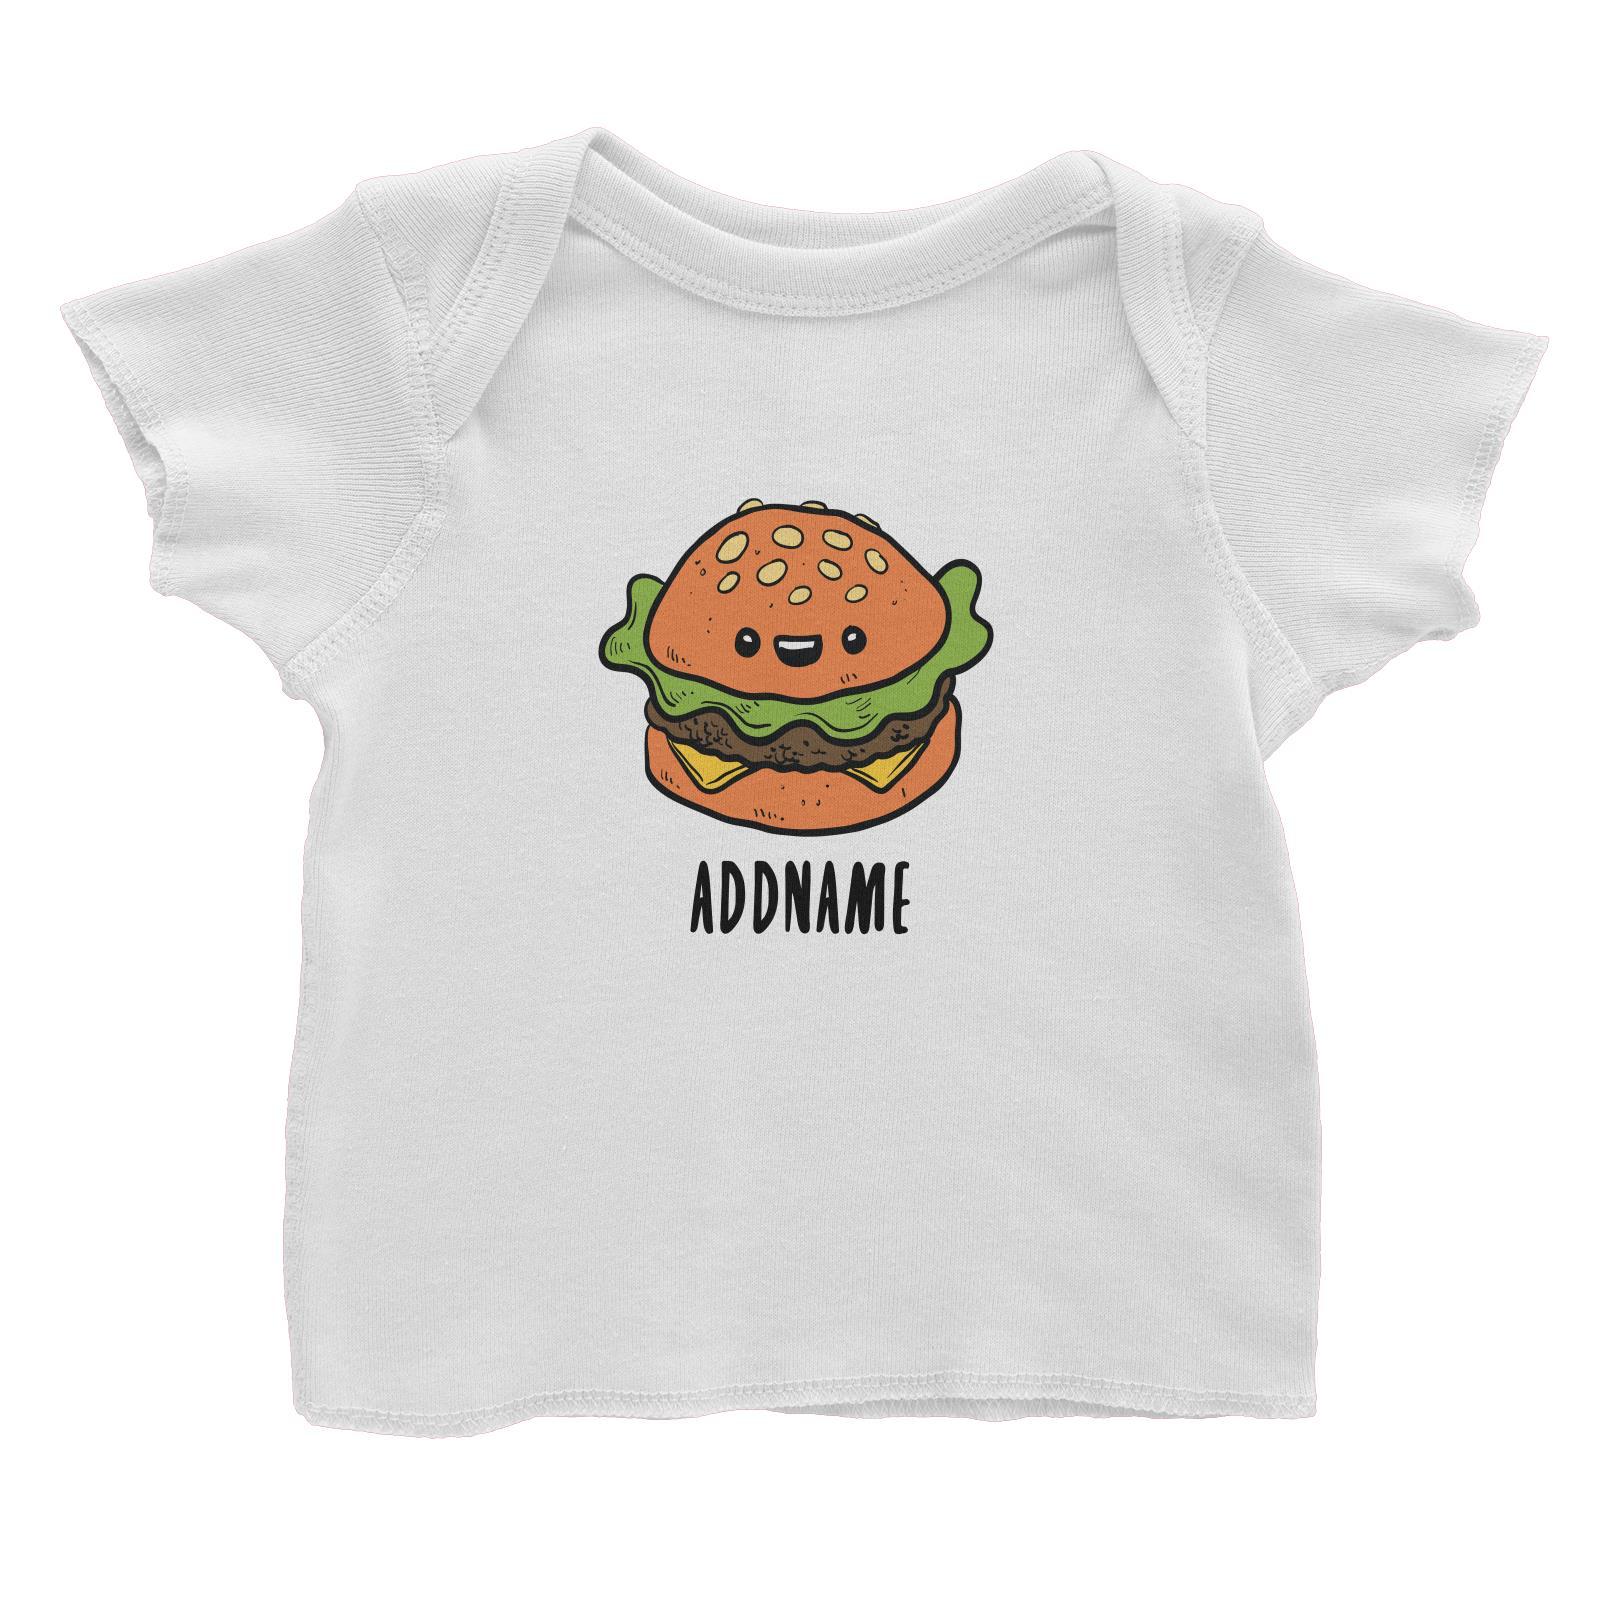 Fast Food Burger Addname Baby T-Shirt  Matching Family Comic Cartoon Personalizable Designs